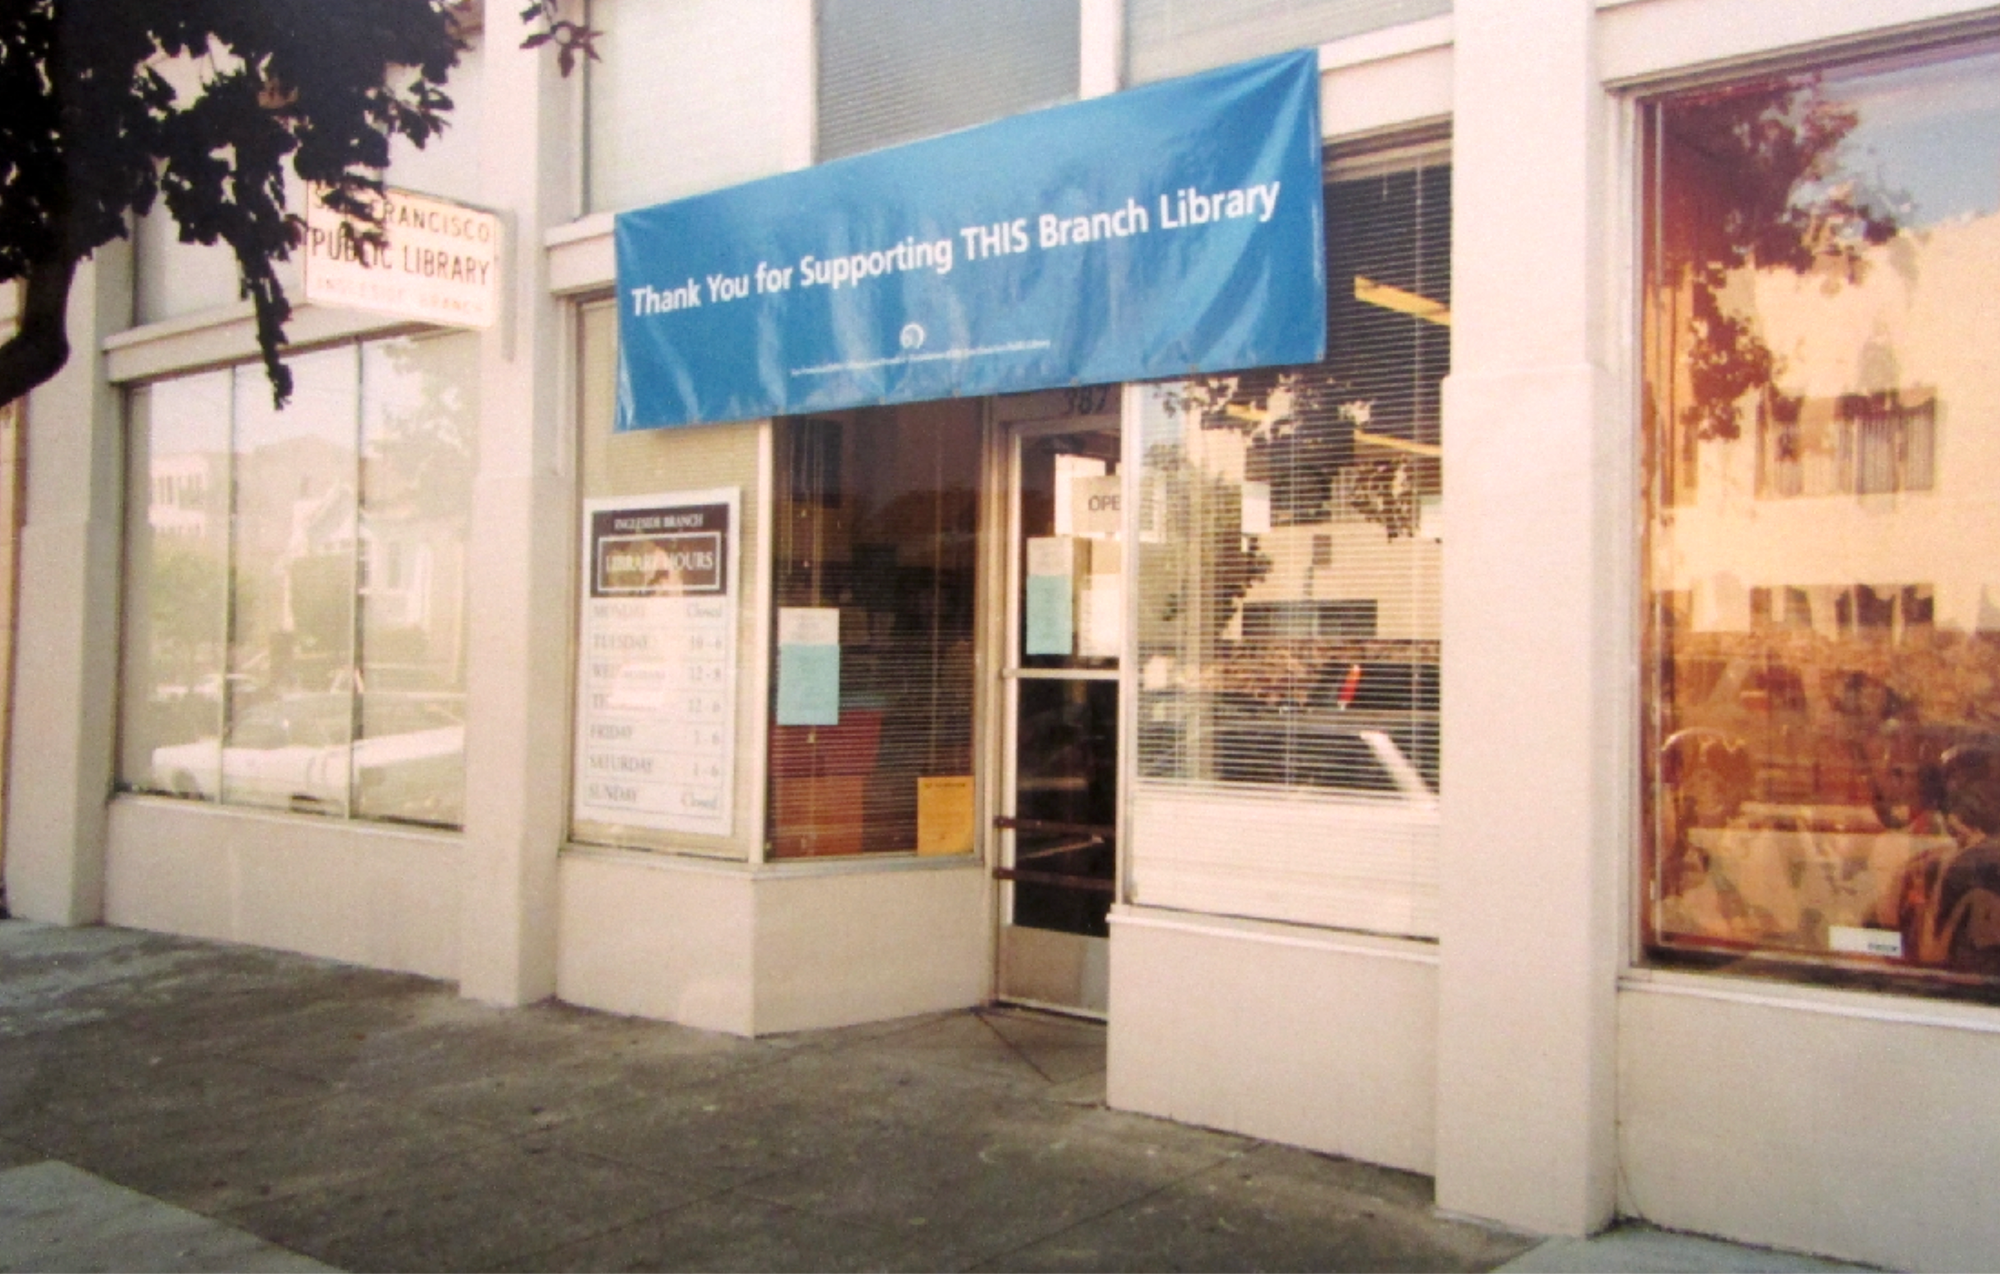 From Deposit Station To Civic Landmark: The Story of Ingleside's Library